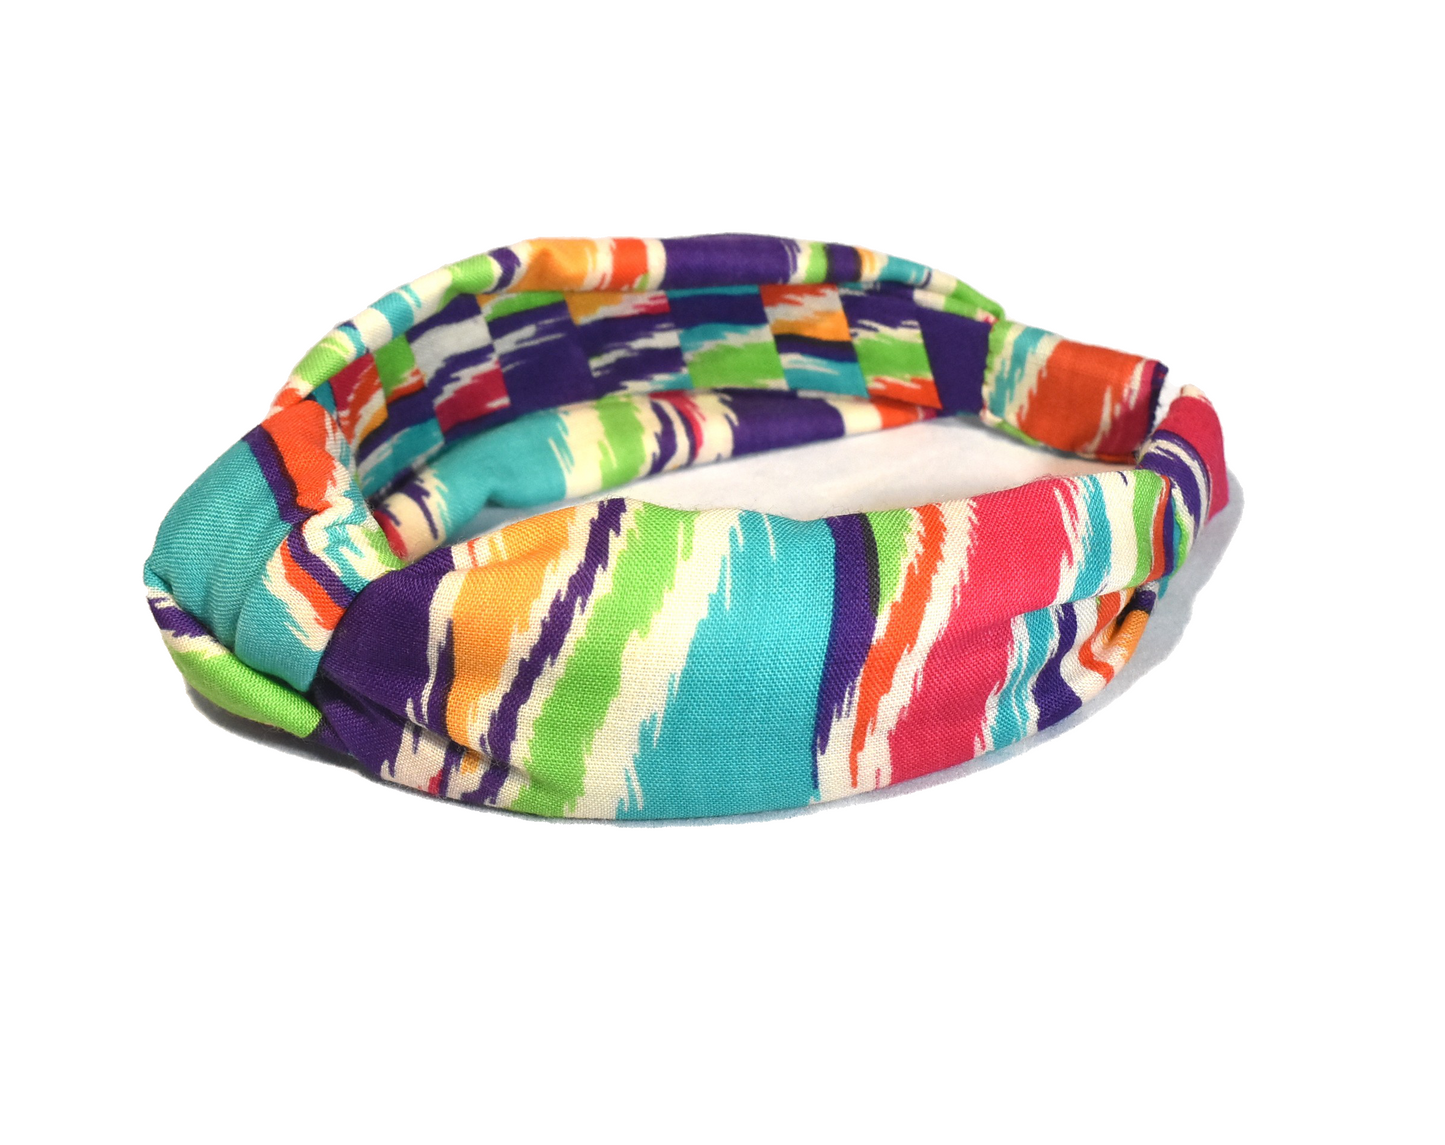 Knot Alice band - Vintage Liberty of London Bright Multicolour Ikat Graphic in Varuna wool